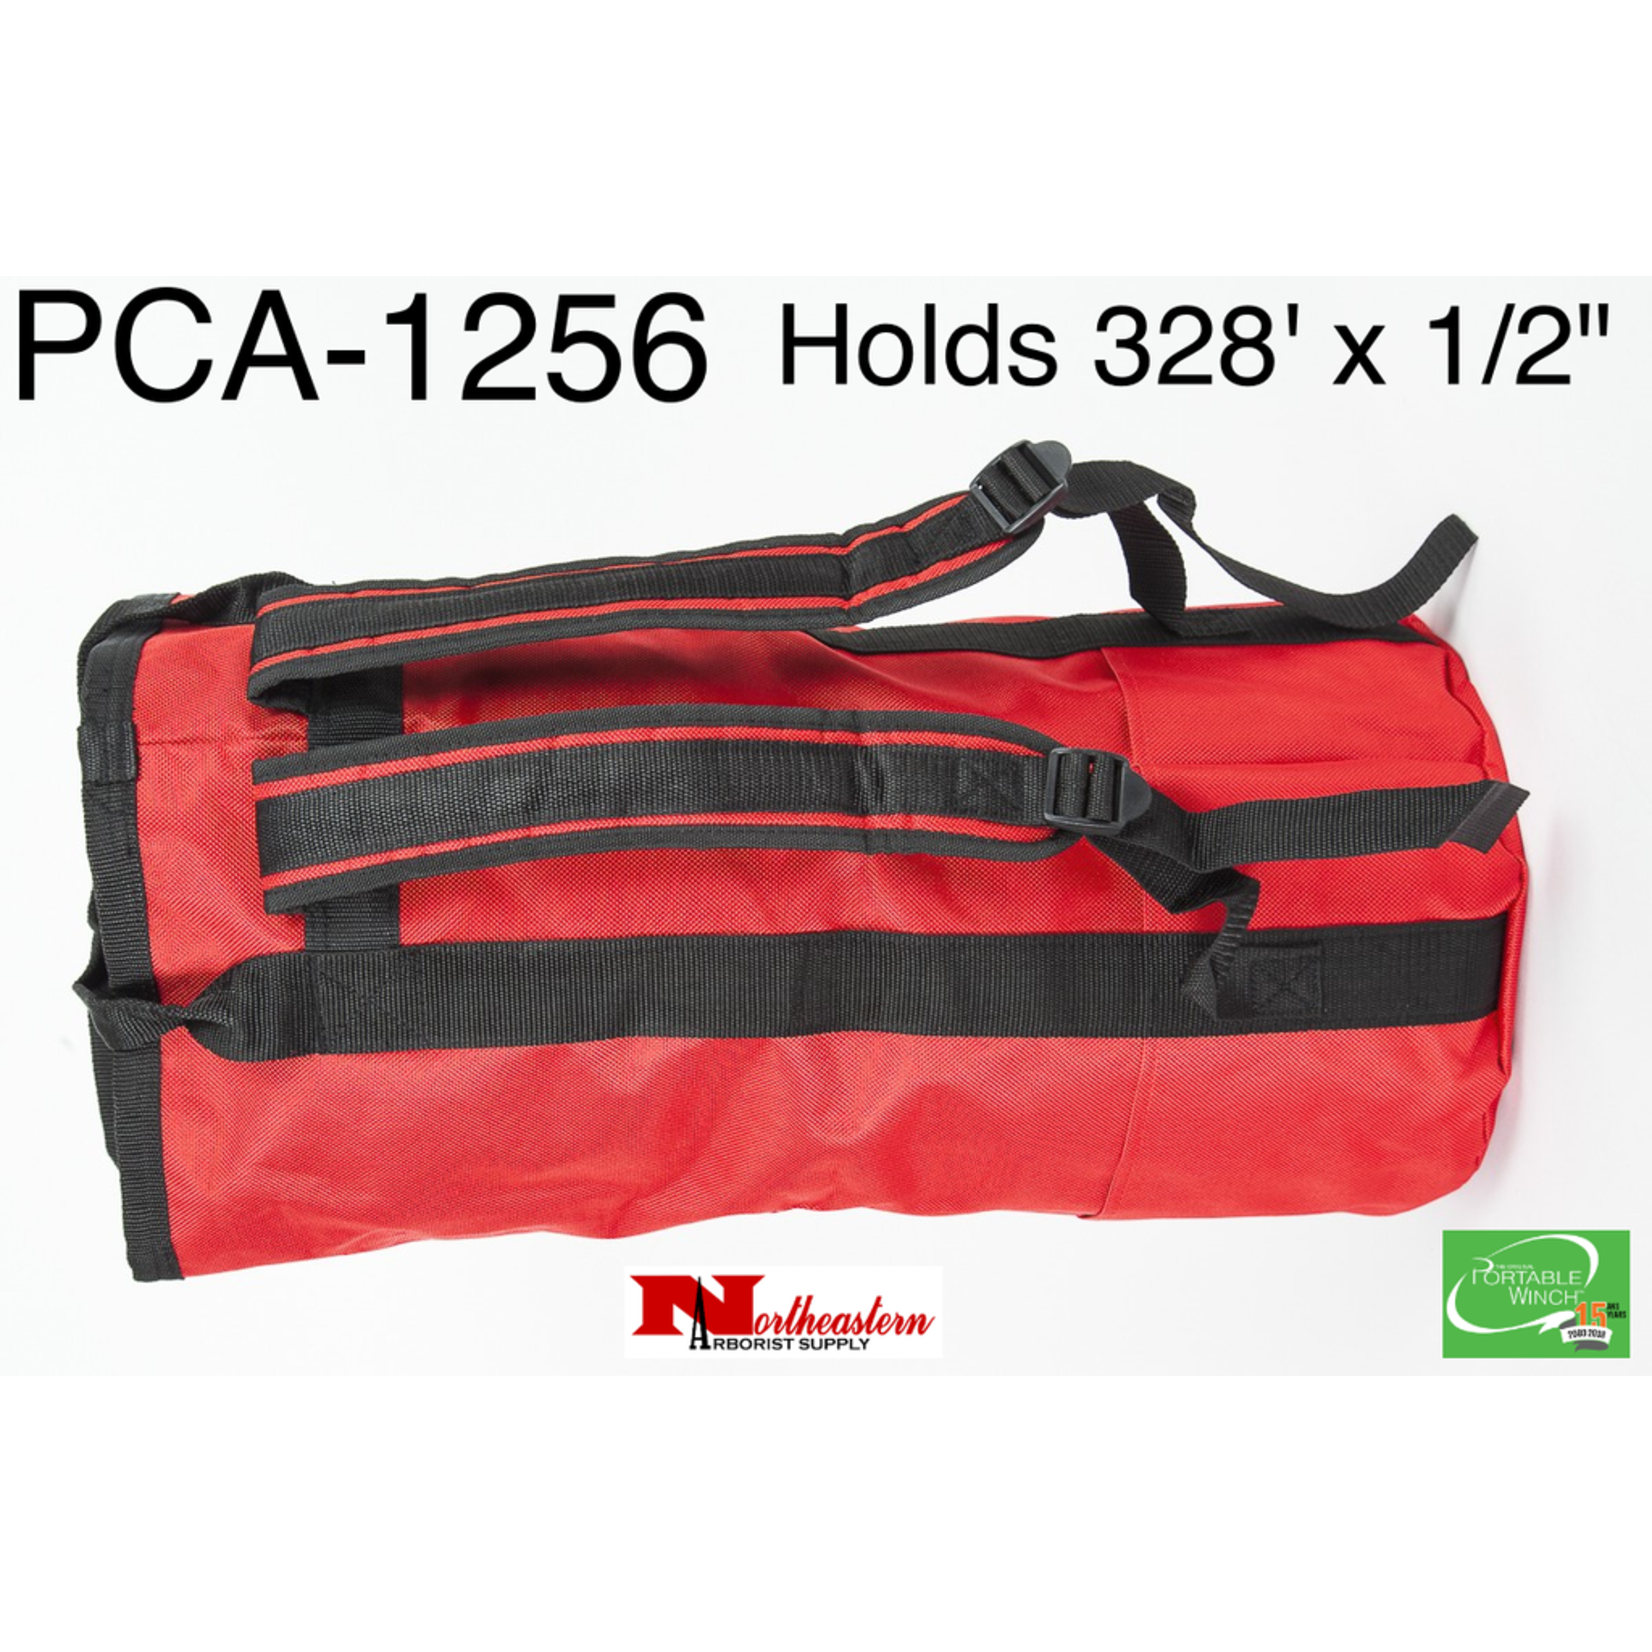 PORTABLE WINCH CO. Rope Bag with Shoulder Straps, Medium Red Holds 328' of 1/2" Rope